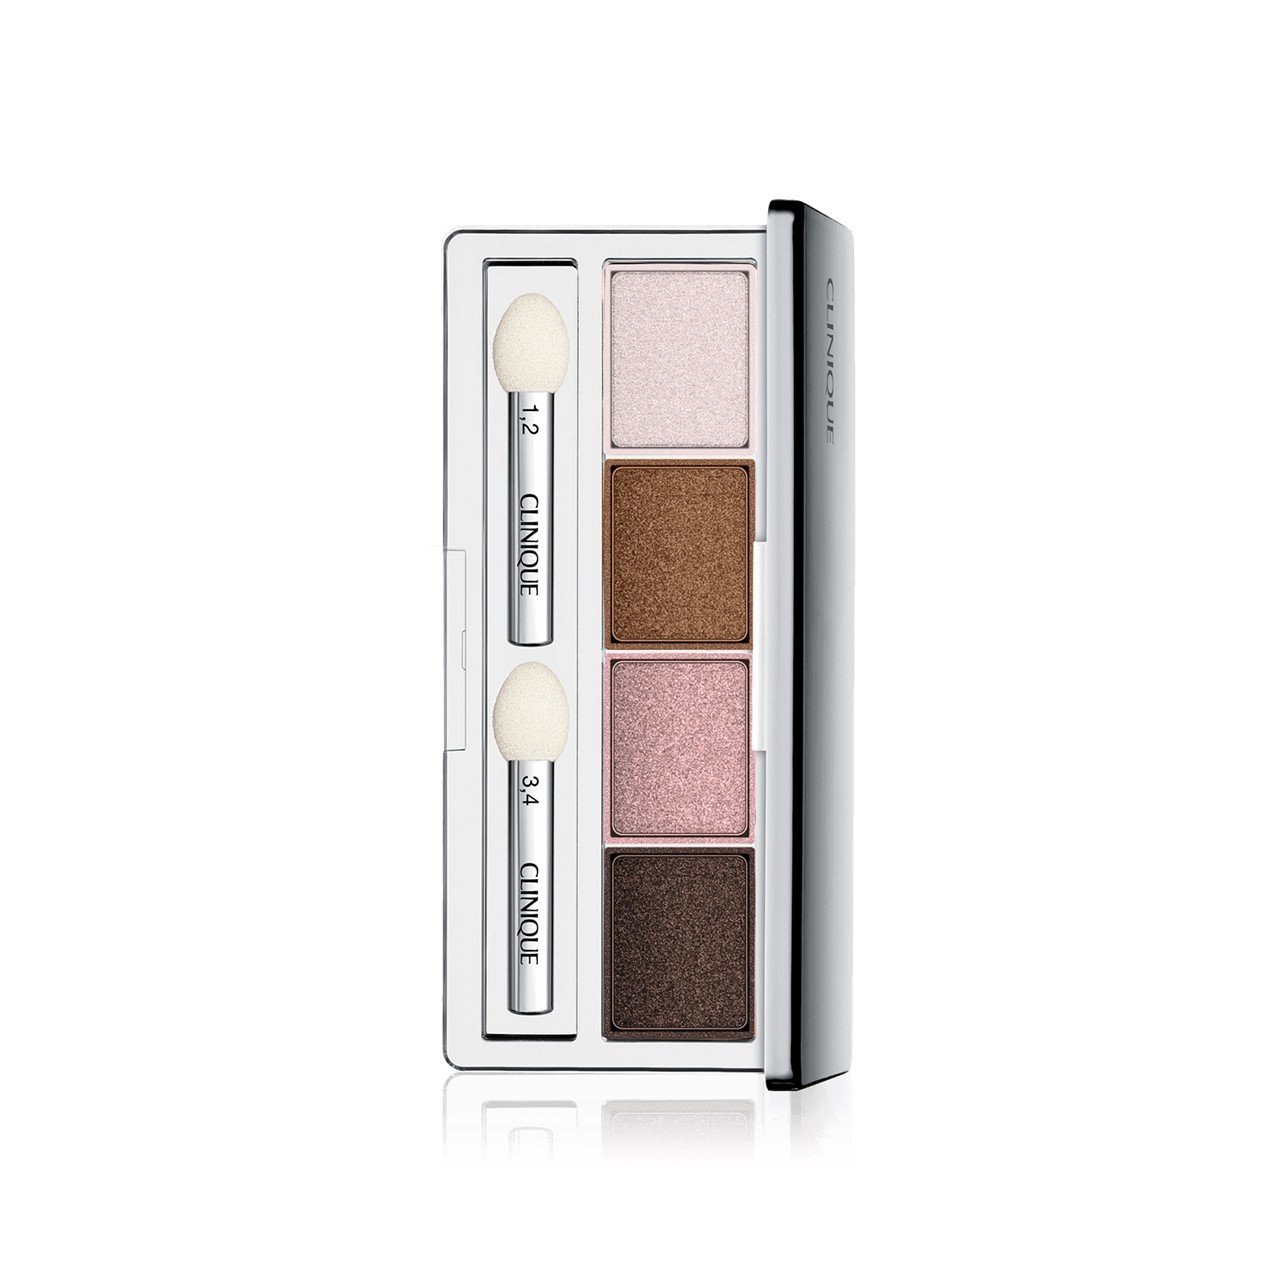 Buy Clinique All About Shadow Quad Eyeshadow Pink Chocolate 4.8g ...